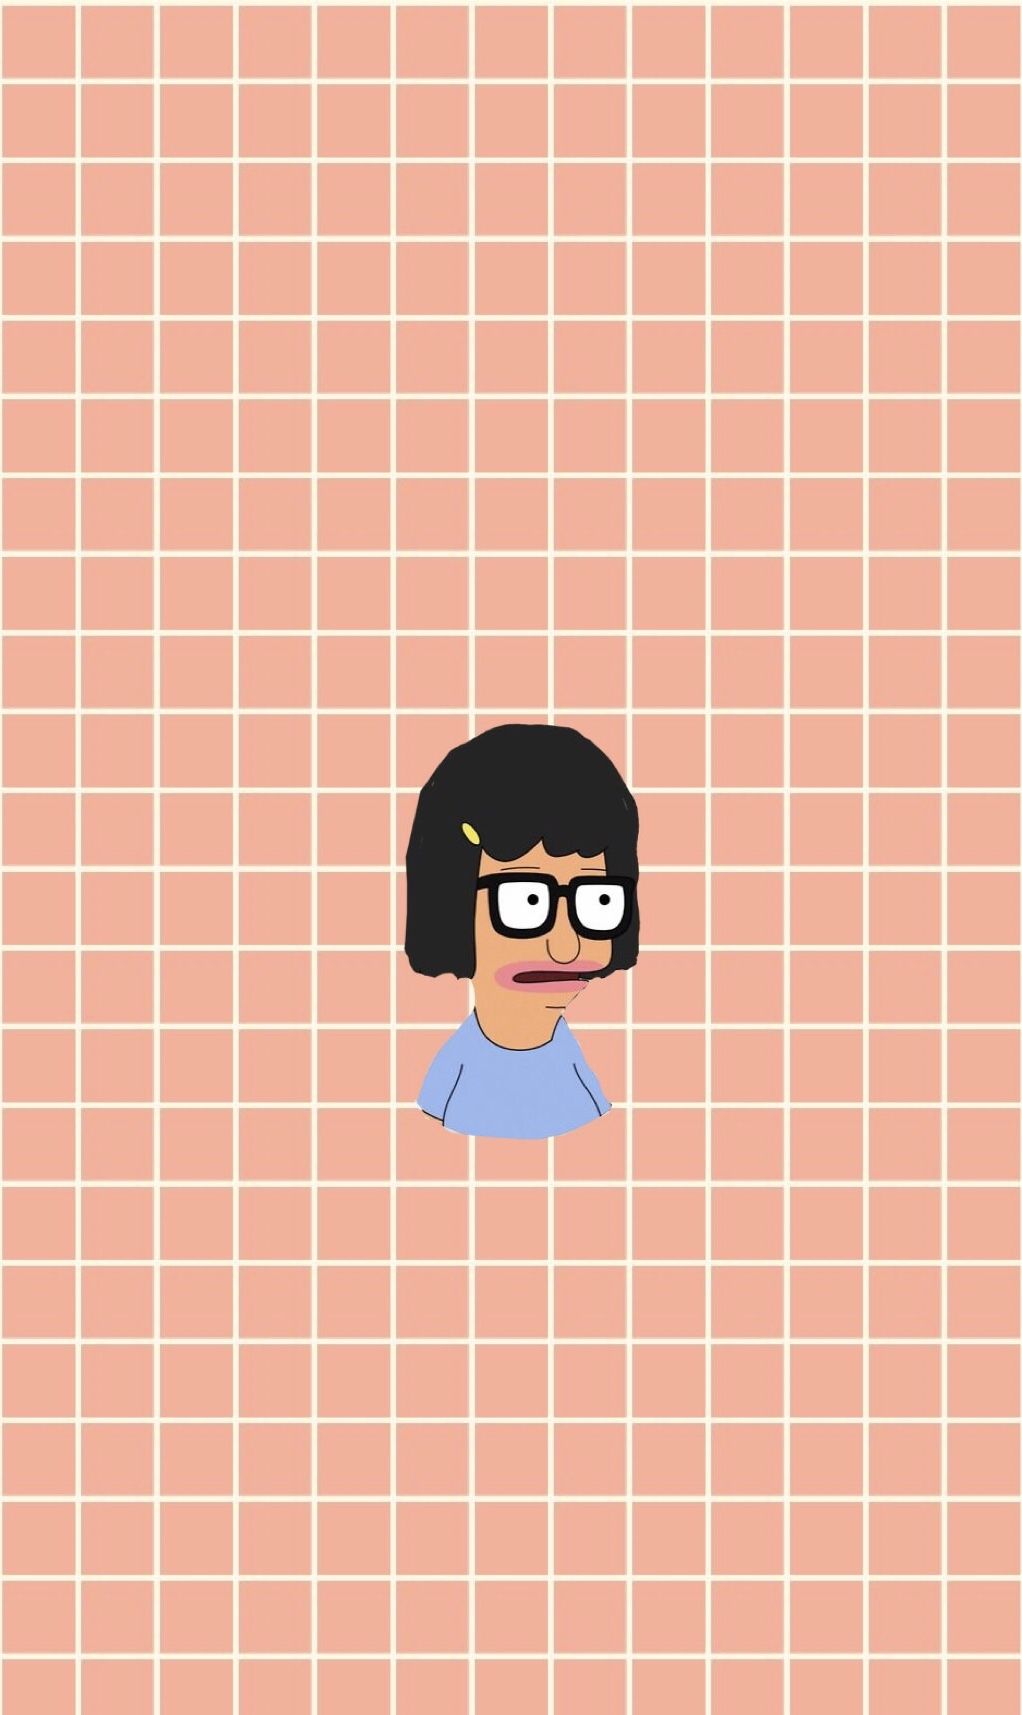 Removed the text from the Bobs Burgers movie poster and converted it into  a mobile wallpaper  9GAG